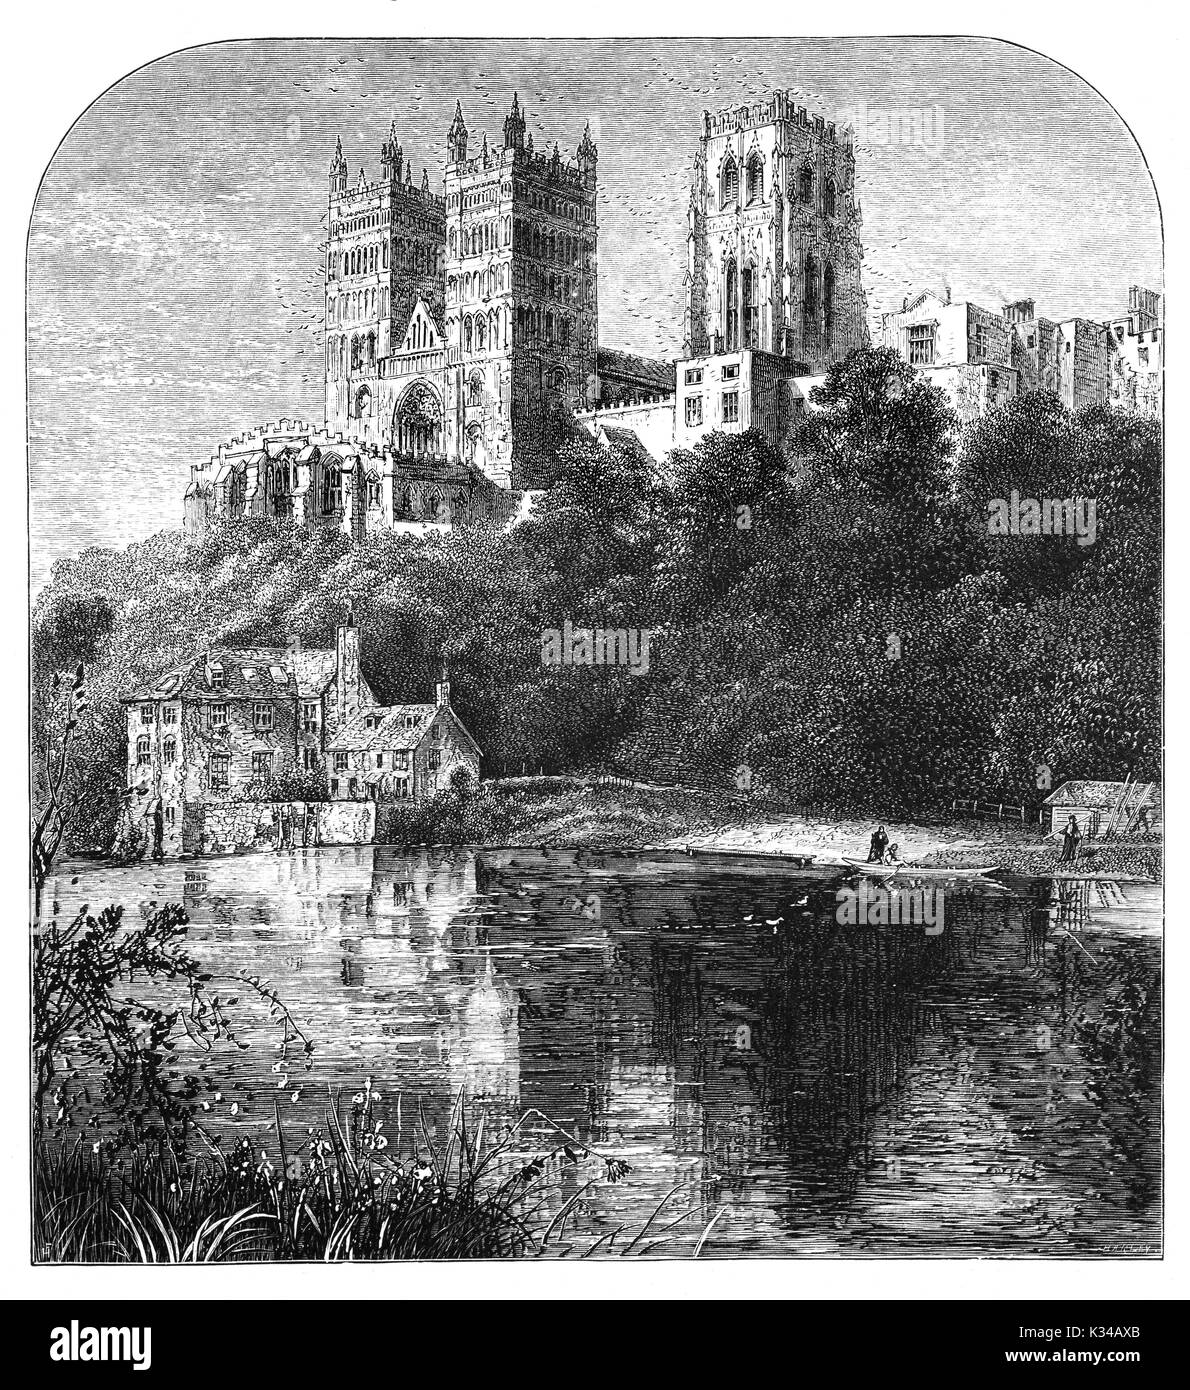 1870: The Cathedral Church of Christ, Blessed Mary the Virgin and St Cuthbert of Durham, usually known as Durham Cathedral and home of the Shrine of St Cuthbert, from across the River Wear. The cathedral dates from AD1093 and is regarded as one of the finest examples of Norman architecture and has been designated a UNESCO World Heritage Site, County Durham, England Stock Photo